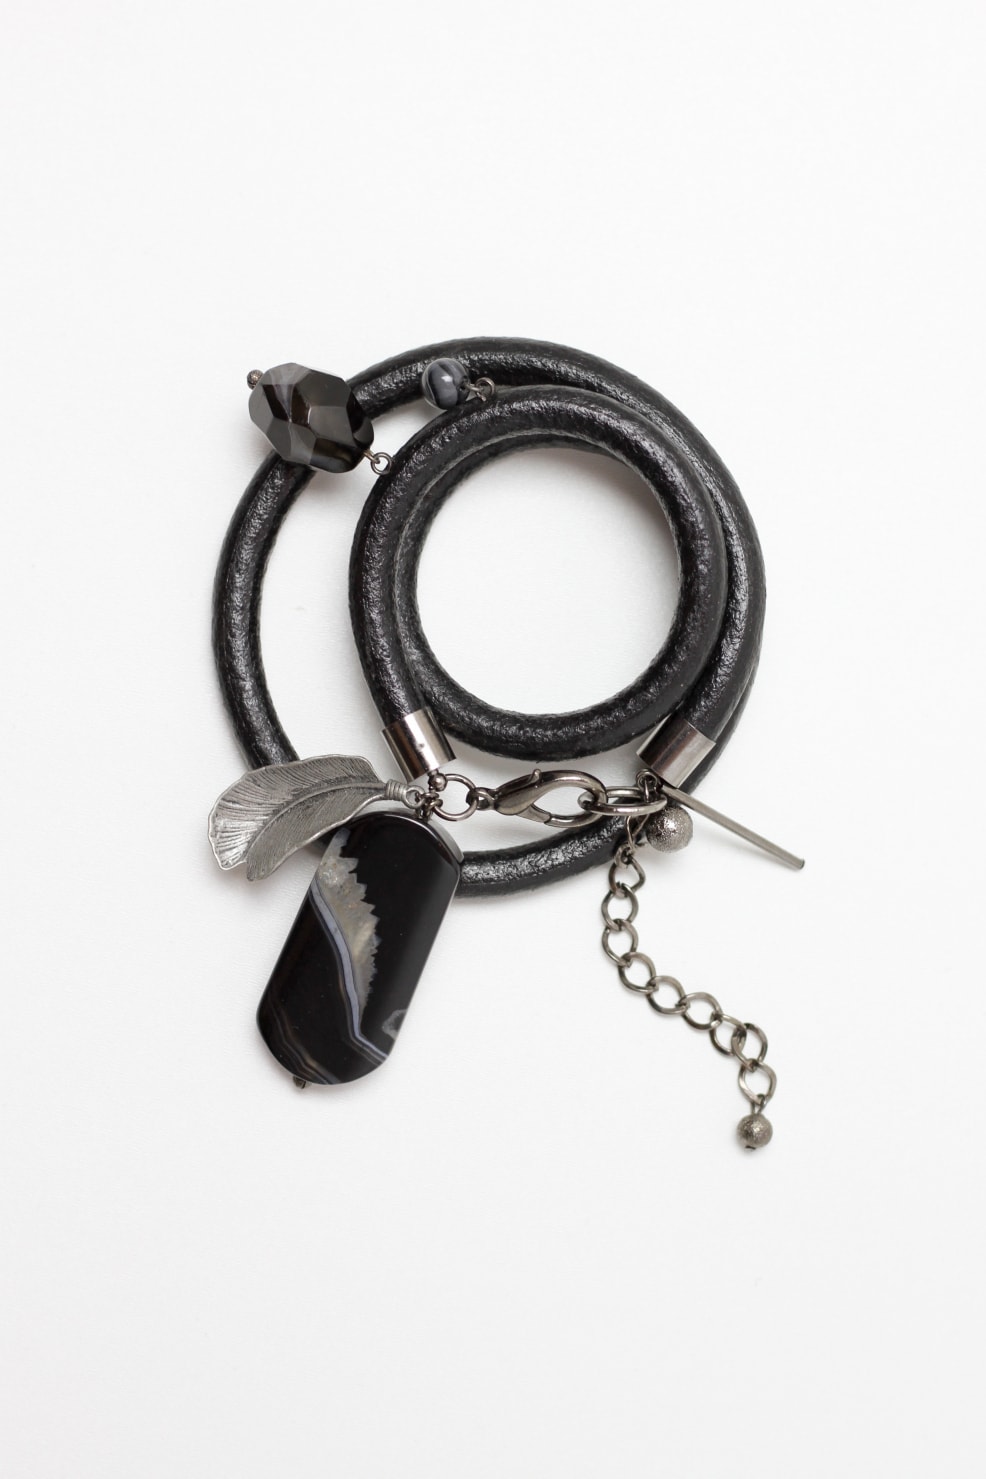 Black agate and leather bracelet